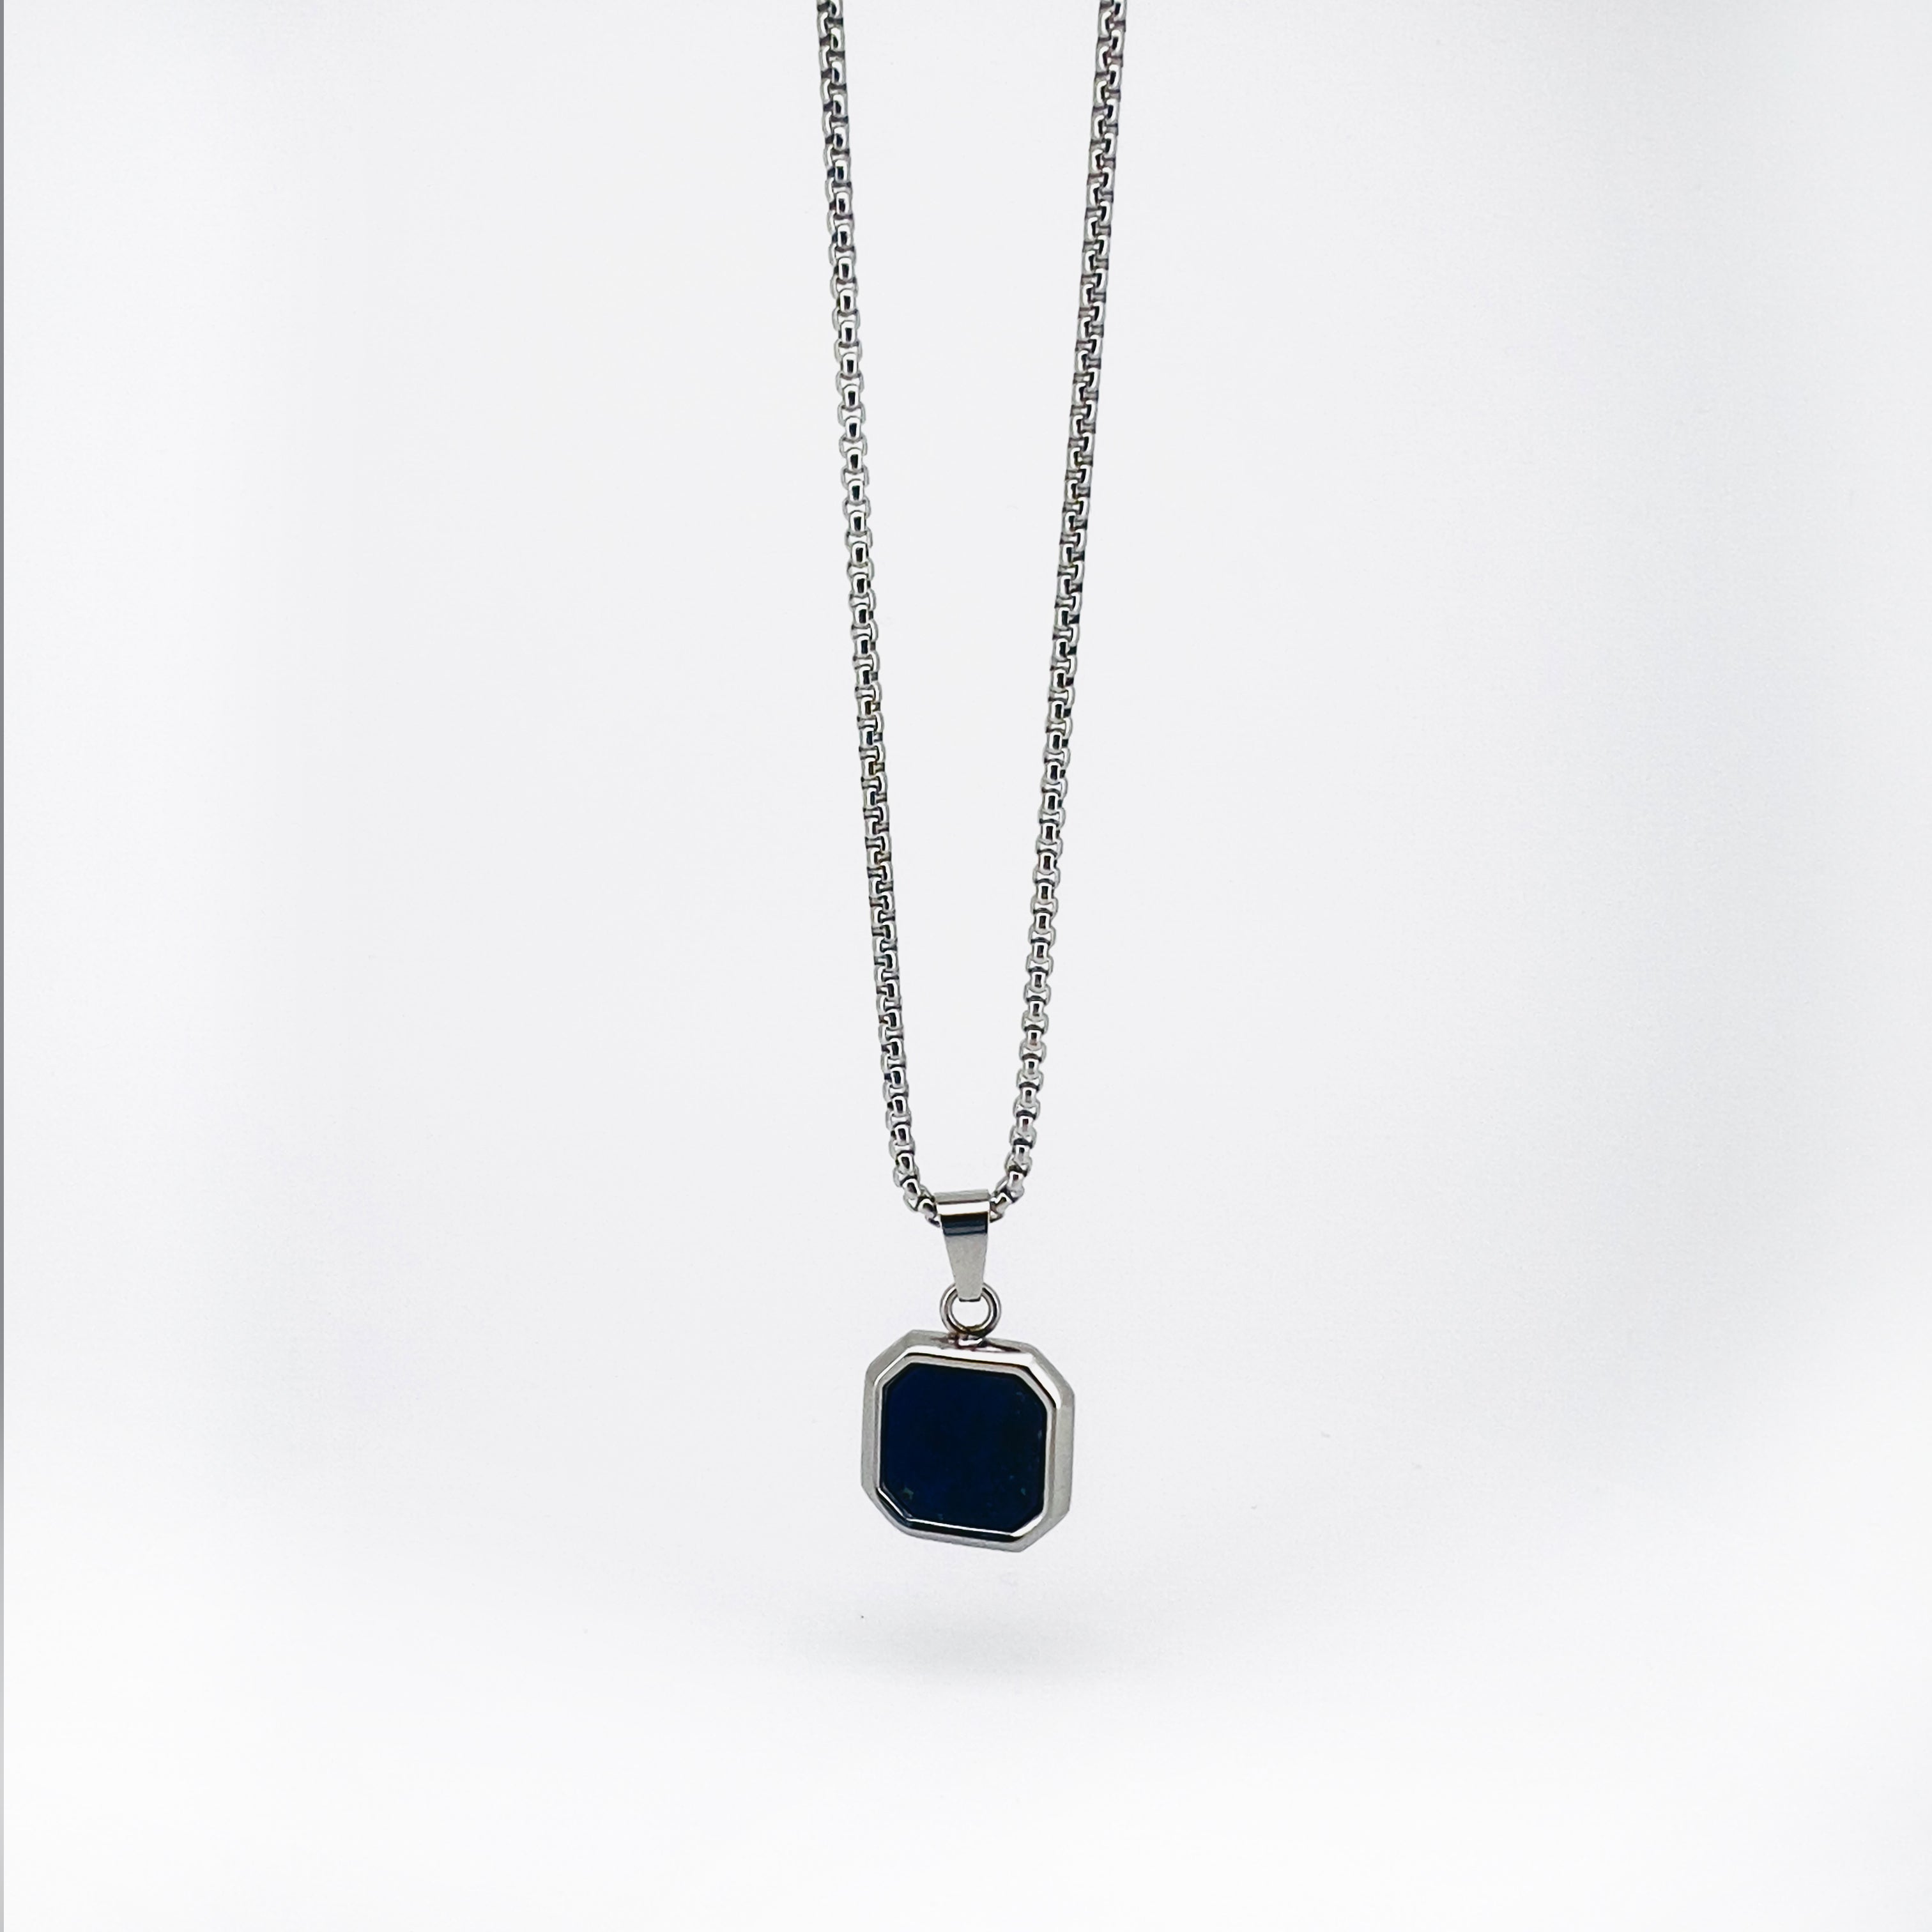 Kare Stainless Steel Box Chain Necklace with Square Stone Pendant